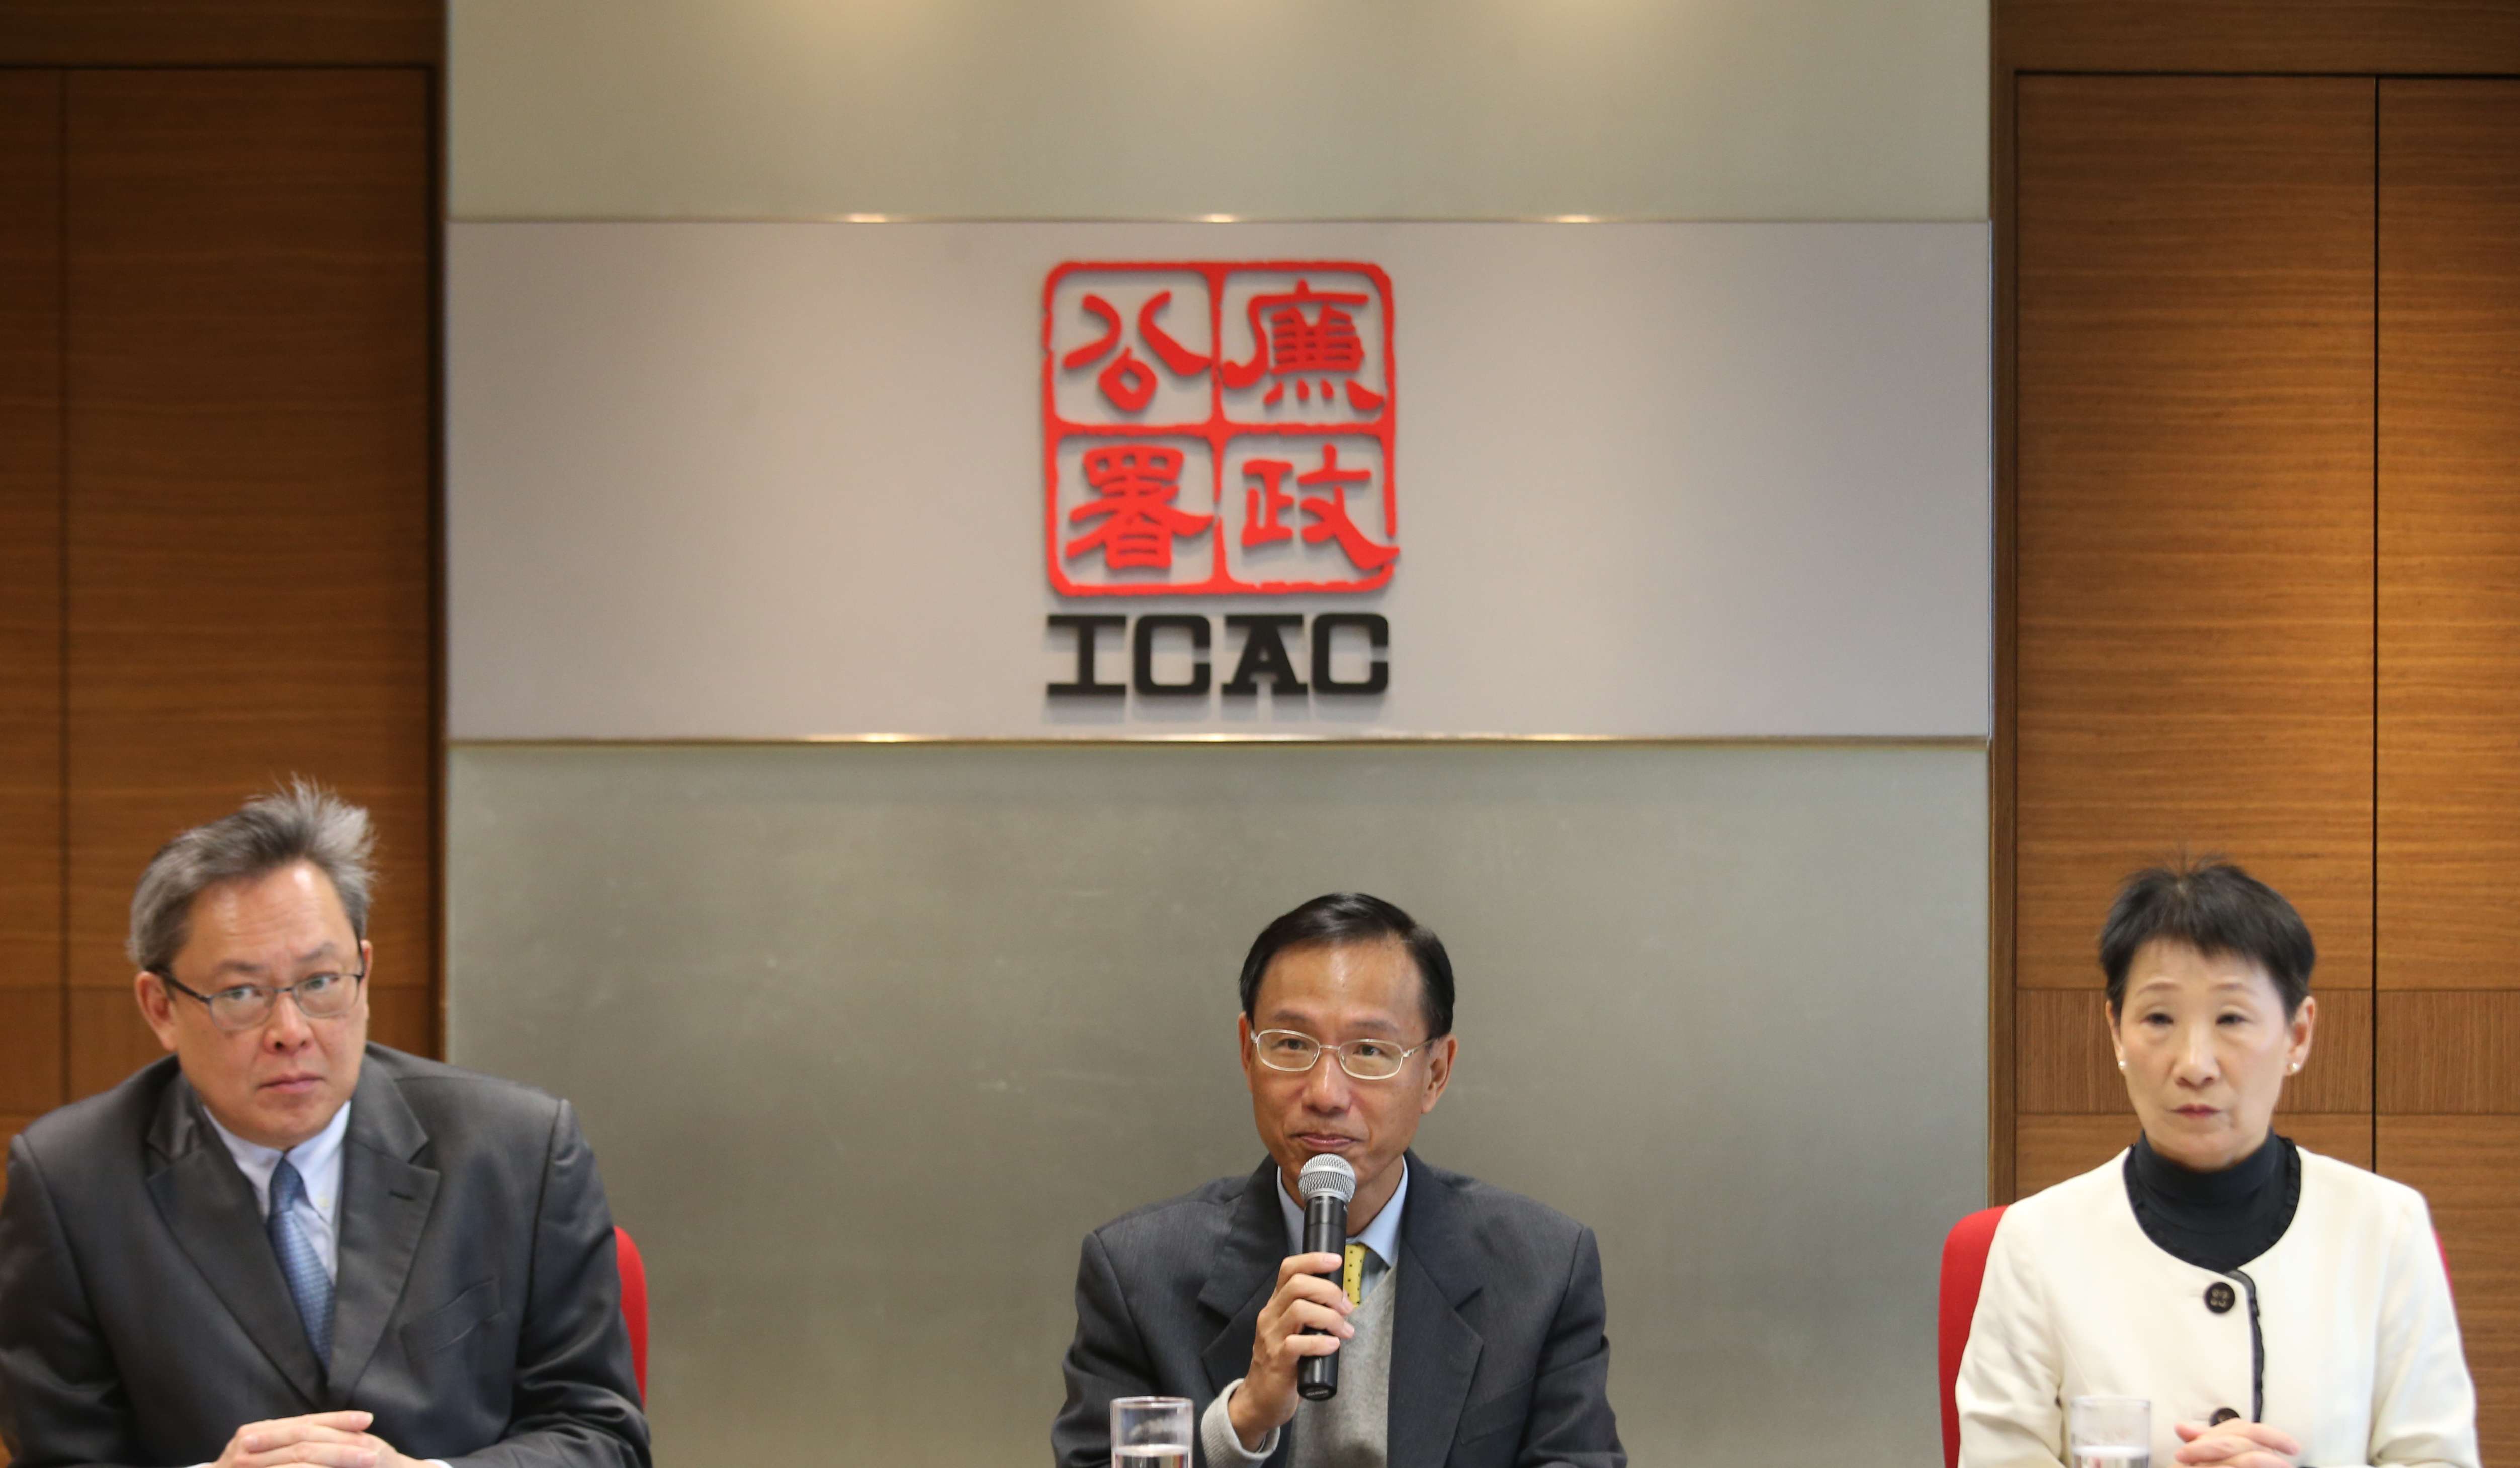 Siu Kin Foon (centre), principal corruption prevention officer at the Independent Commission Against Corruption, addresses a press conference on health care services at the ICAC headquarters in North Point on November 25. Photo: David Wong